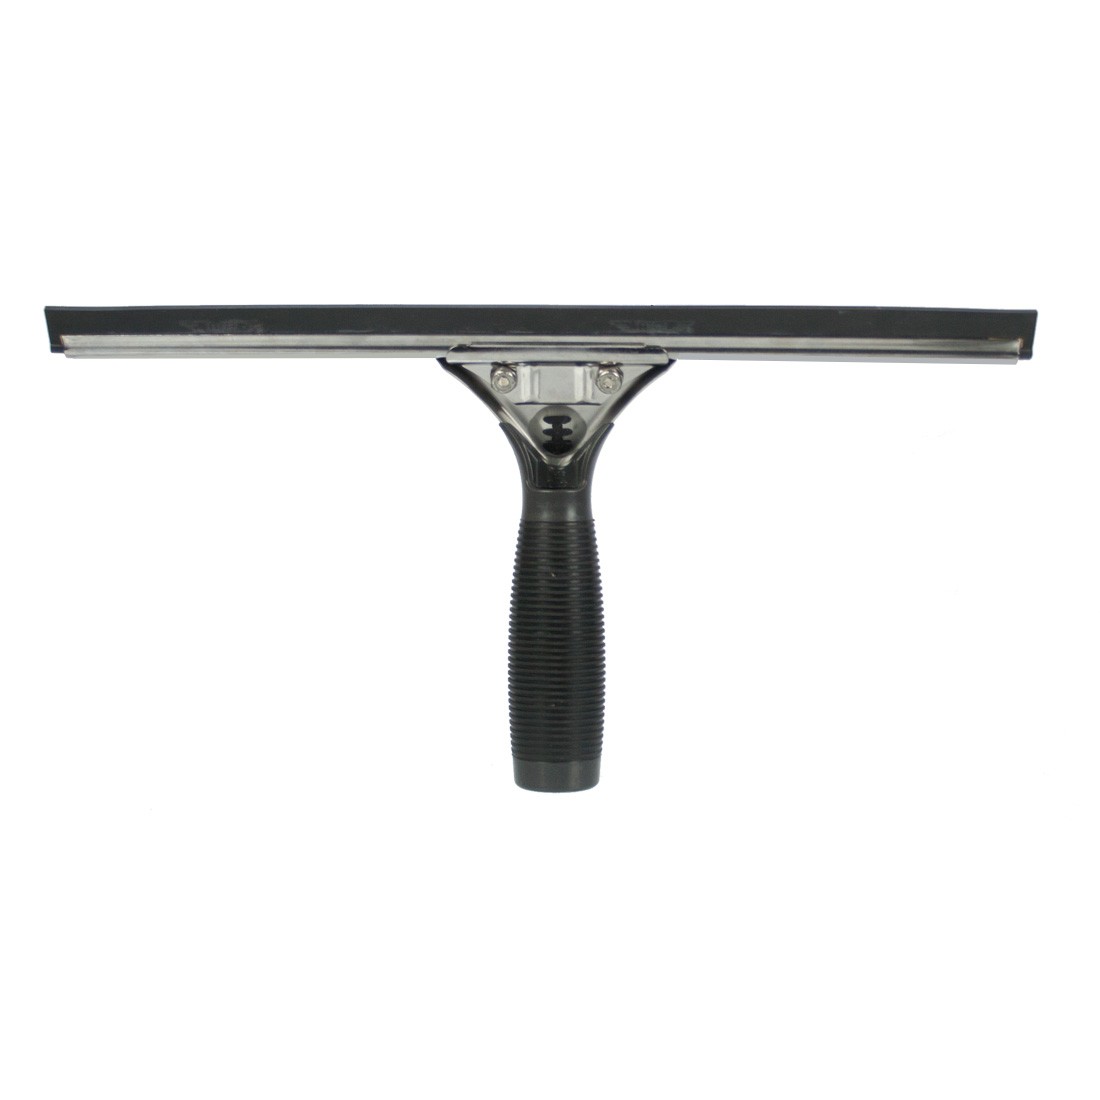 ProGrip Window Squeegee – Ettore Products Co